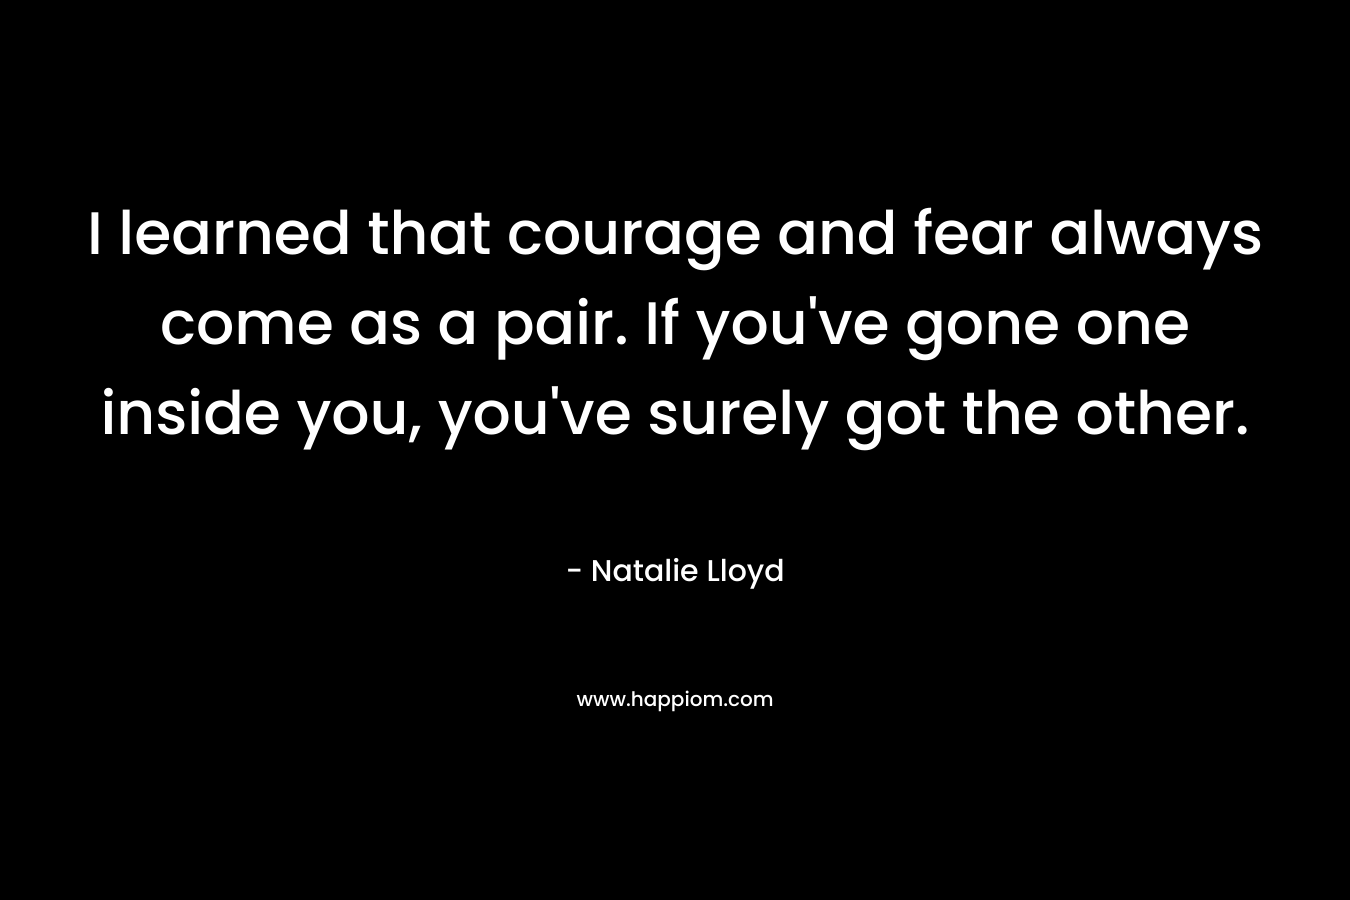 I learned that courage and fear always come as a pair. If you've gone one inside you, you've surely got the other.